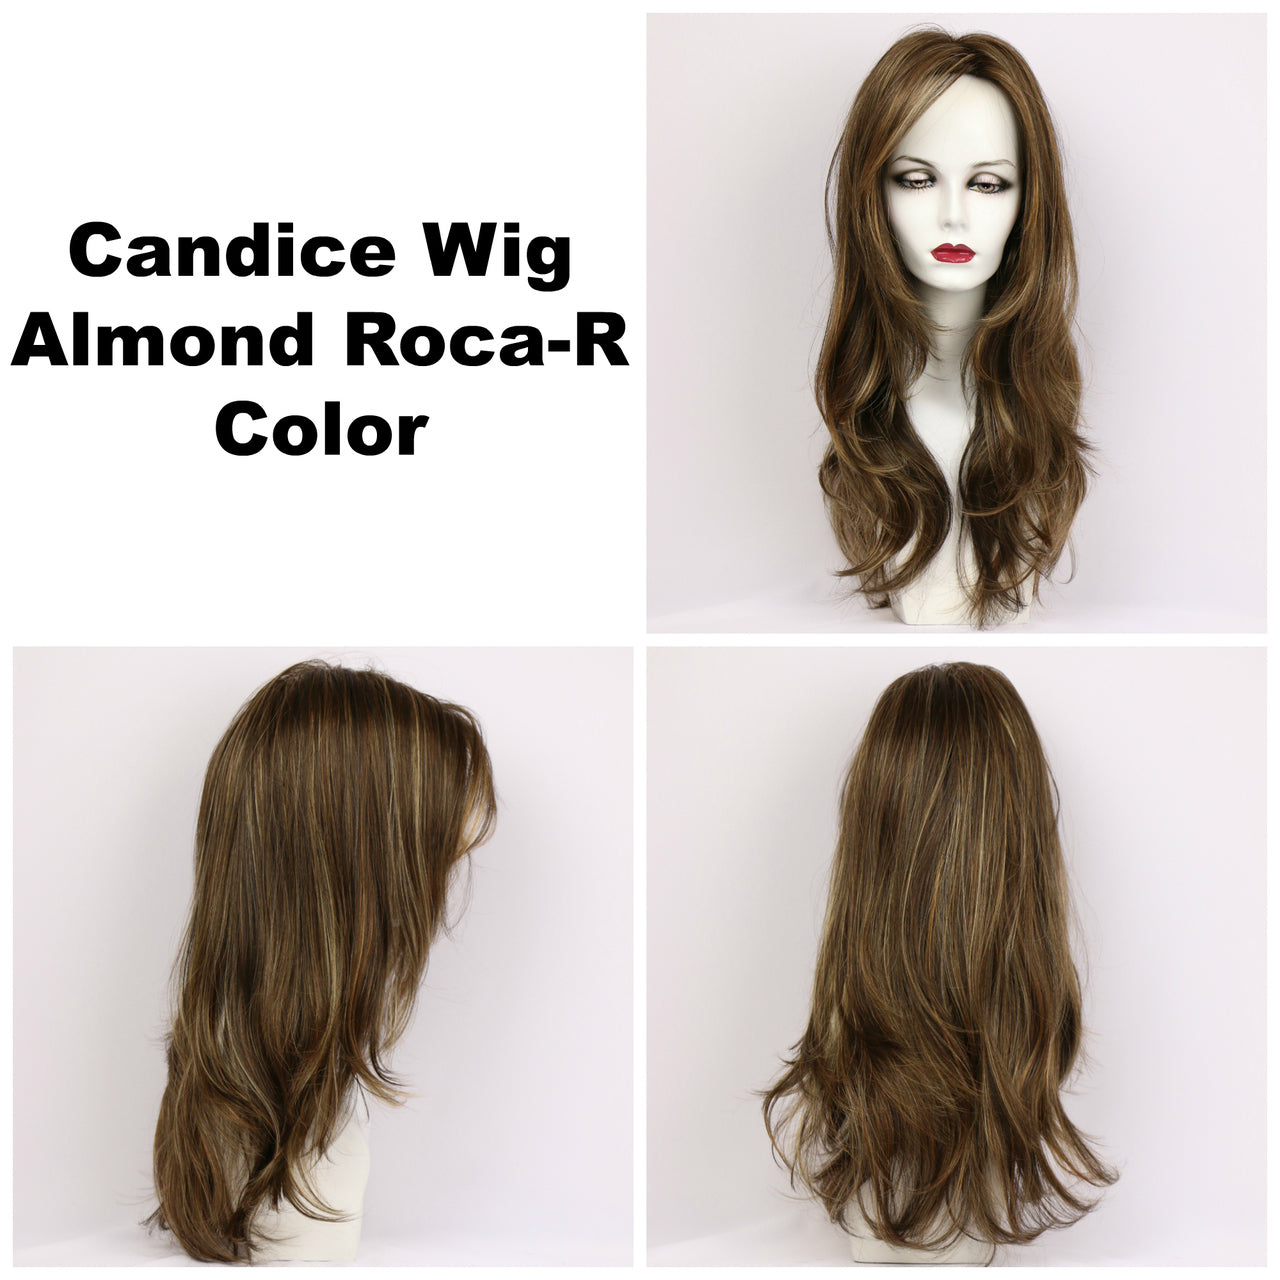 Almond Roca-R / Candice w/ Roots / Long Wig